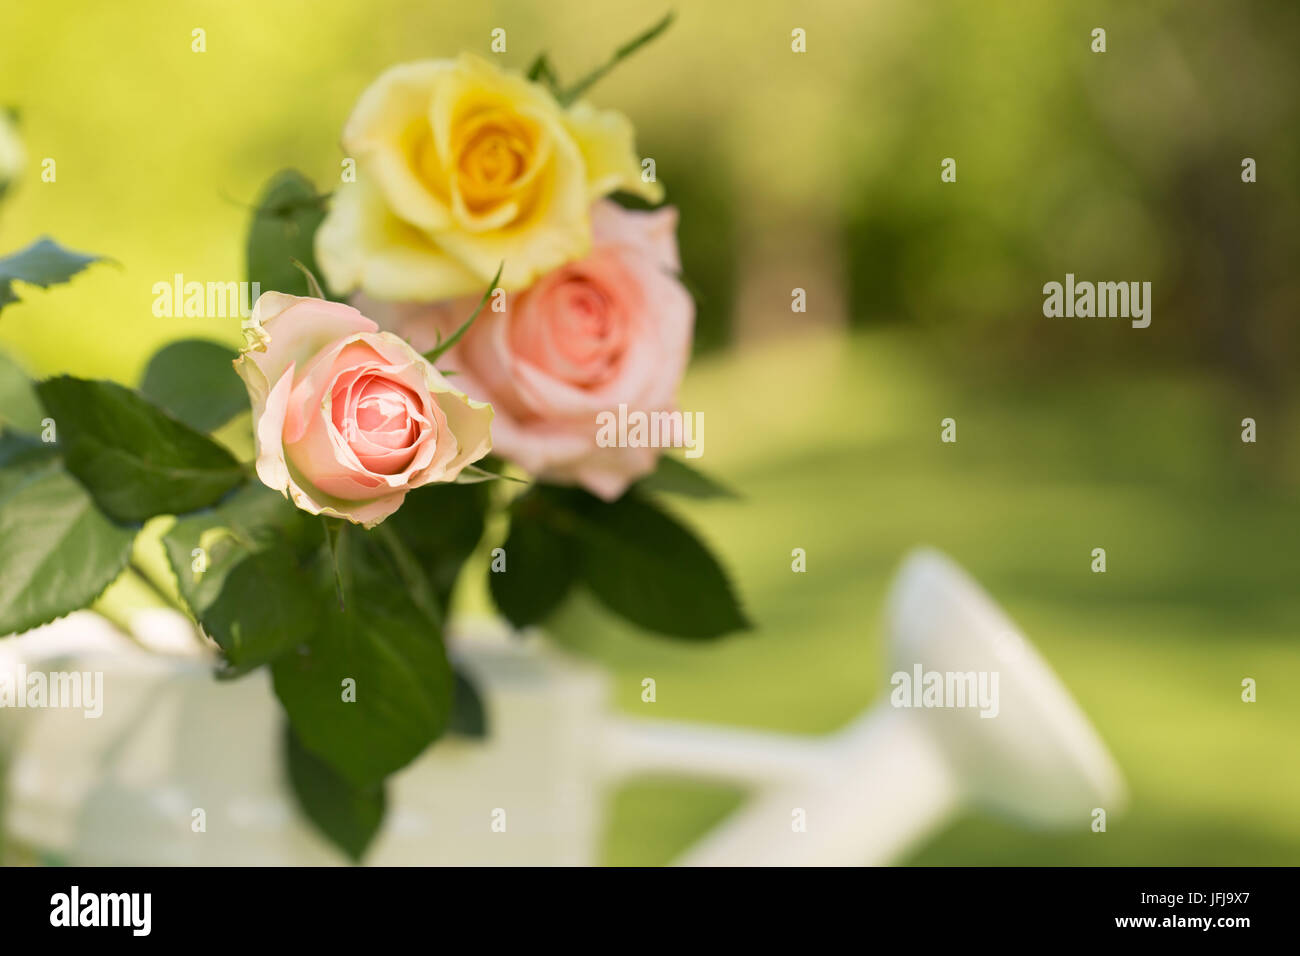 Three pastel tone roses with watering can on a green background, semi shady, outdoors in the garden Stock Photo